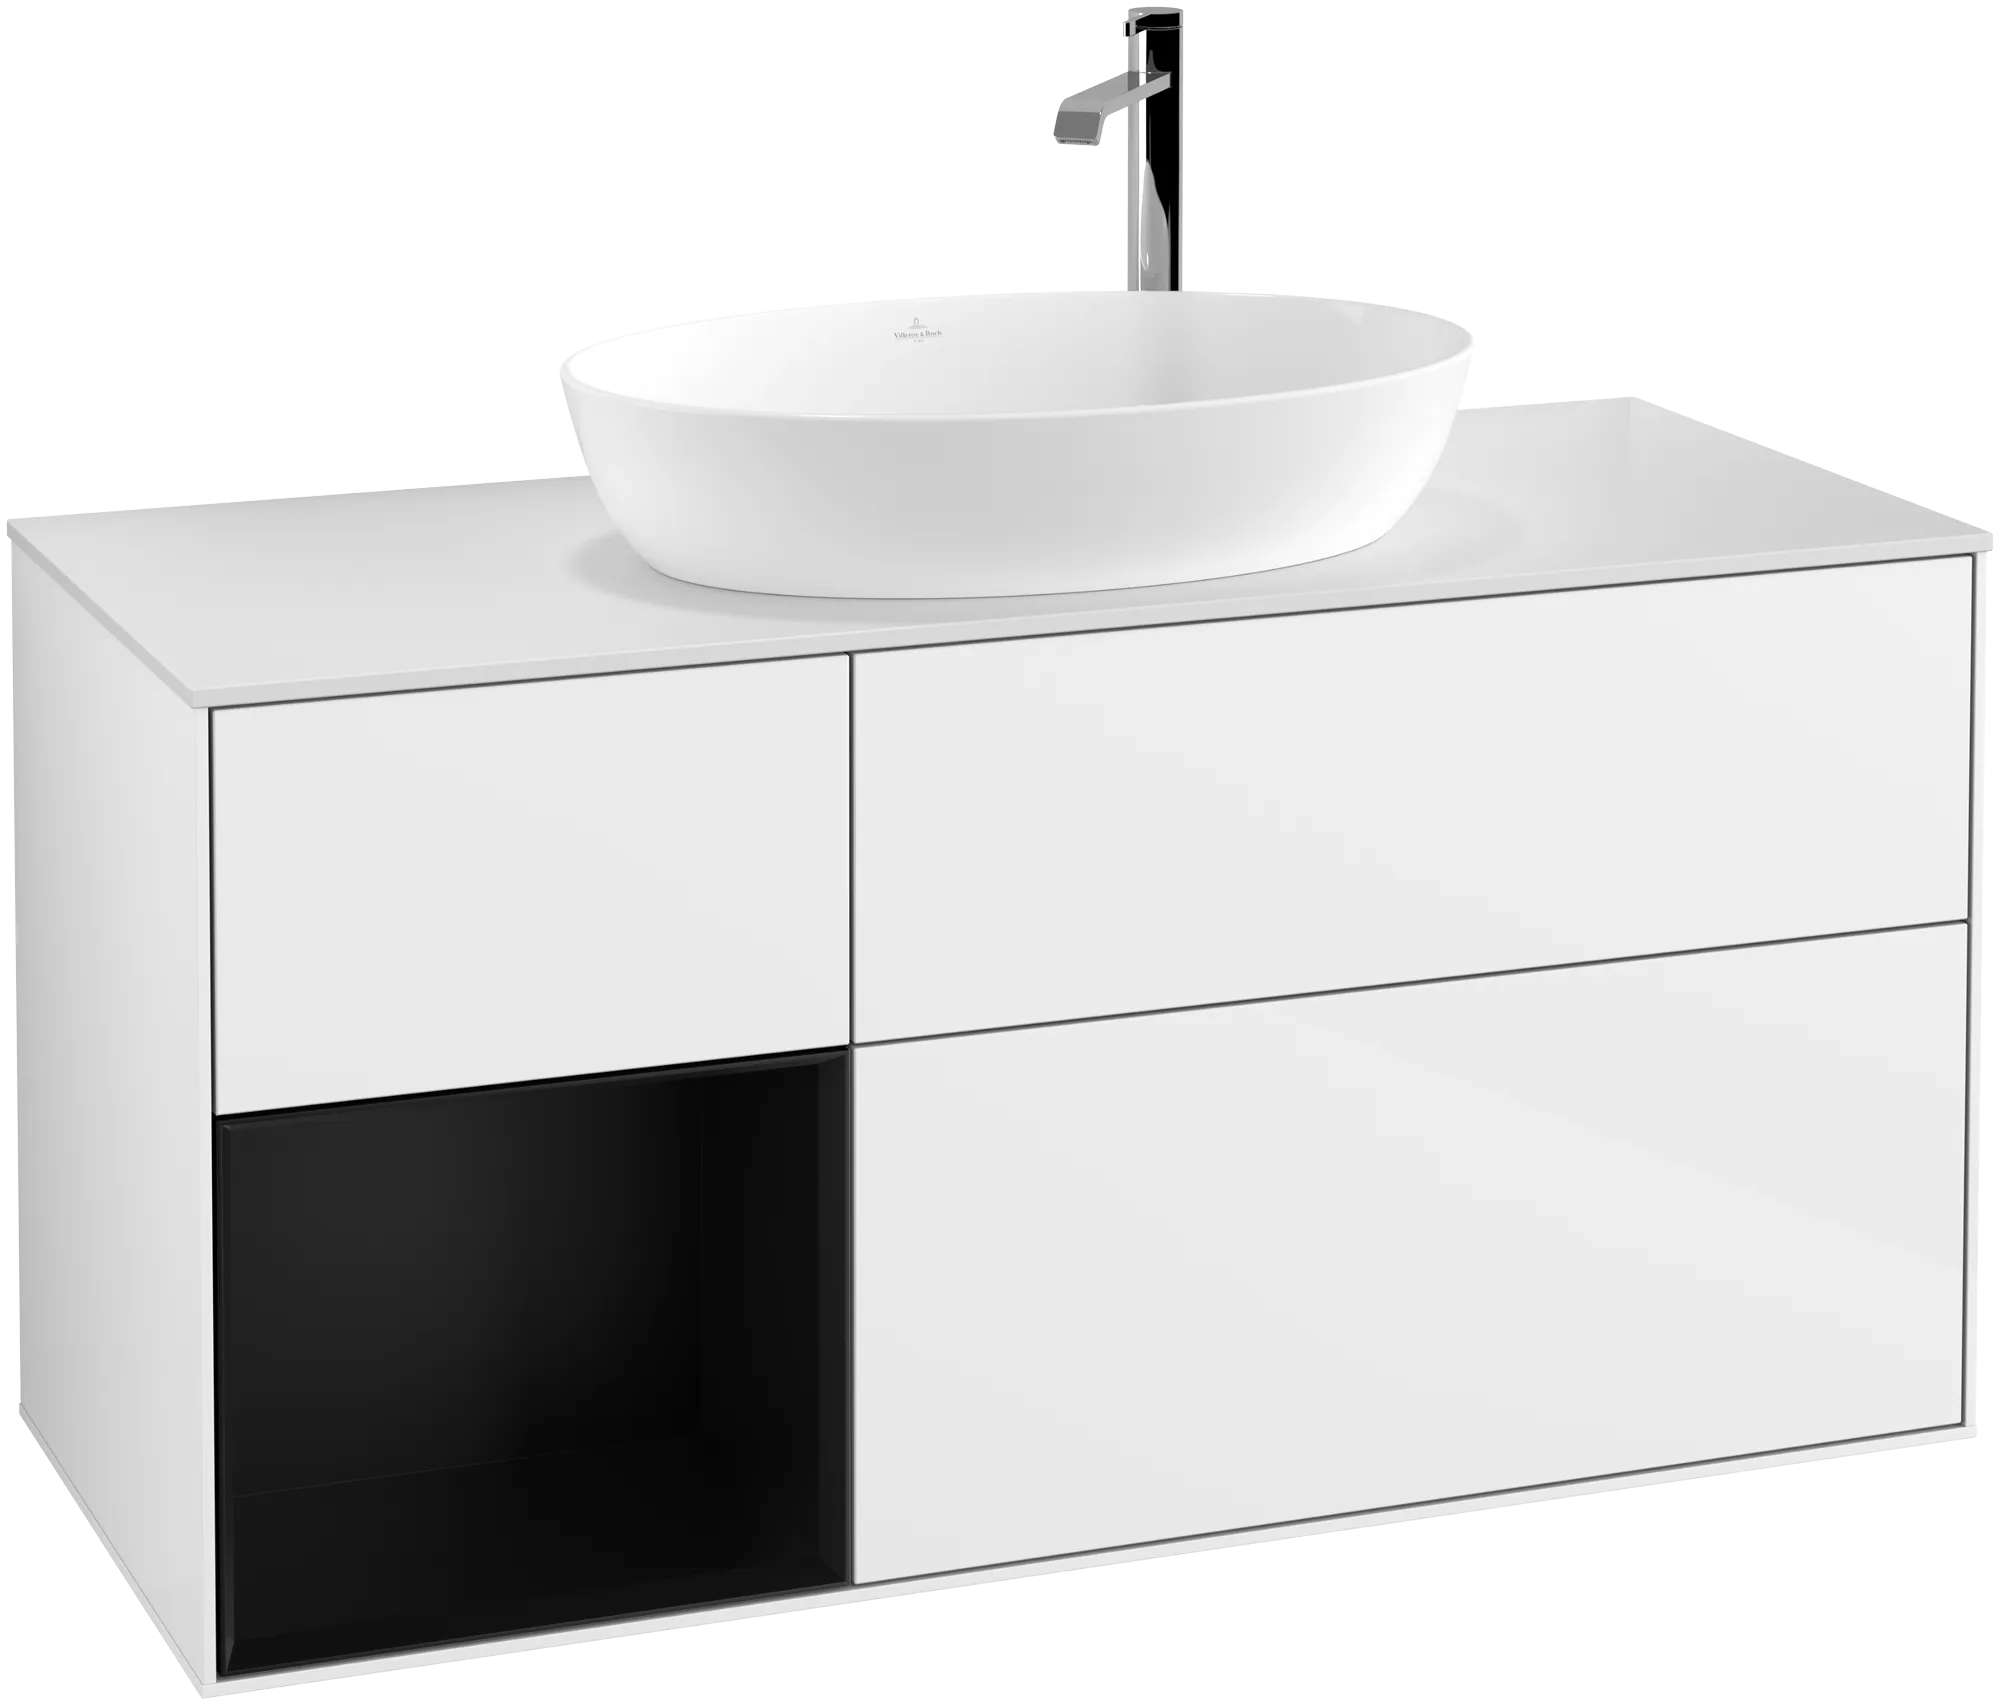 VILLEROY BOCH Finion Vanity unit, with lighting, 3 pull-out compartments, 1200 x 603 x 501 mm, Glossy White Lacquer / Black Matt Lacquer / Glass White Matt #G941PDGF resmi